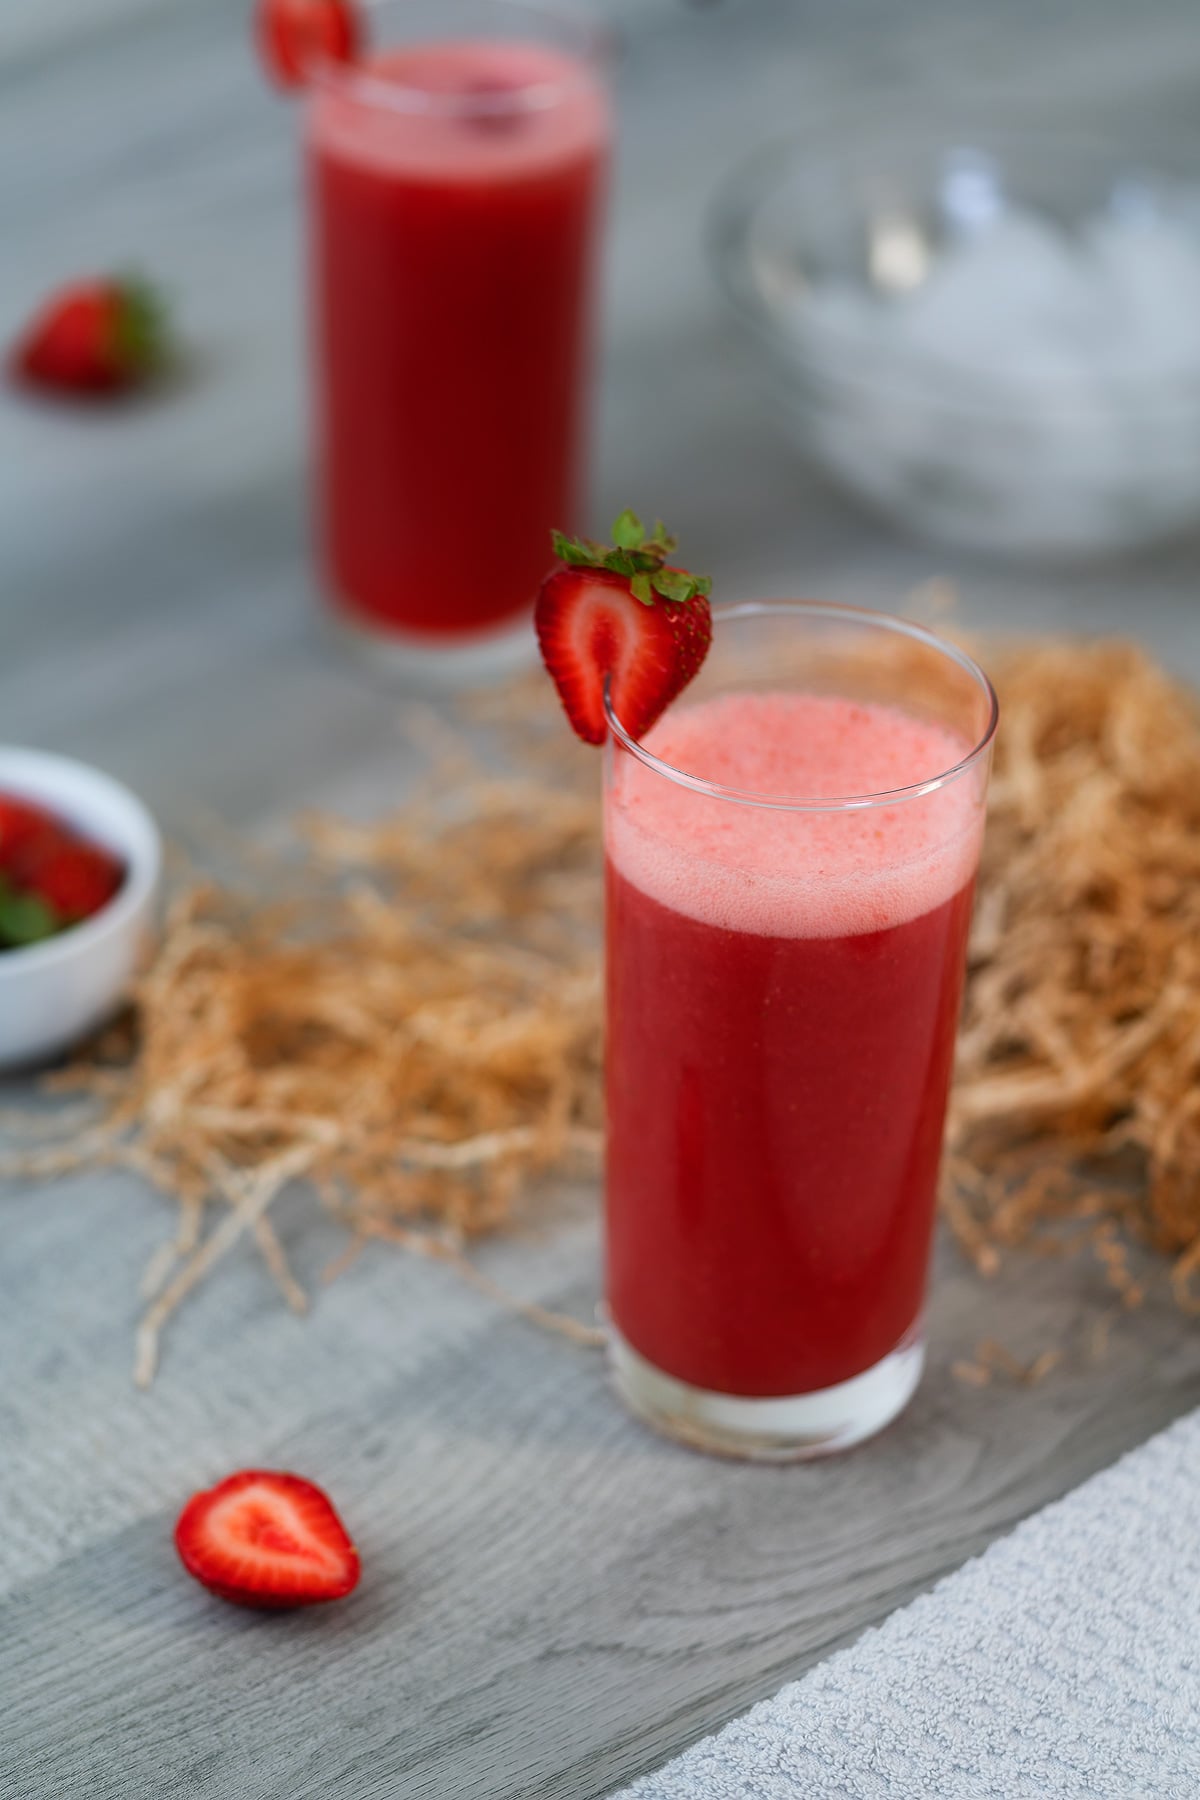 Strawberry Juice in a serving glass with strawberries around.